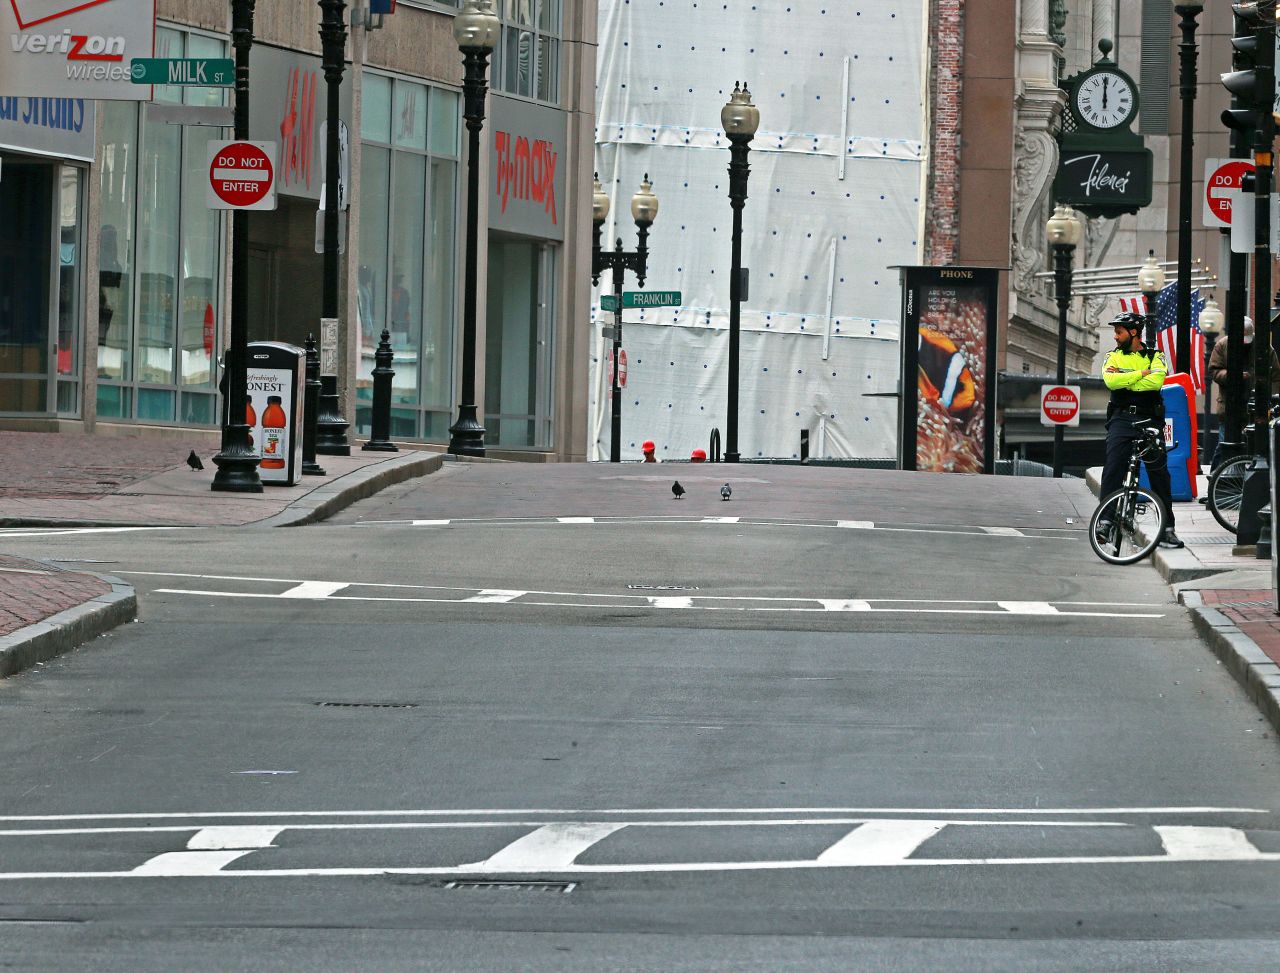 The area near Boston's Downtown Crossing would usually be filled with lunchtime crowds.